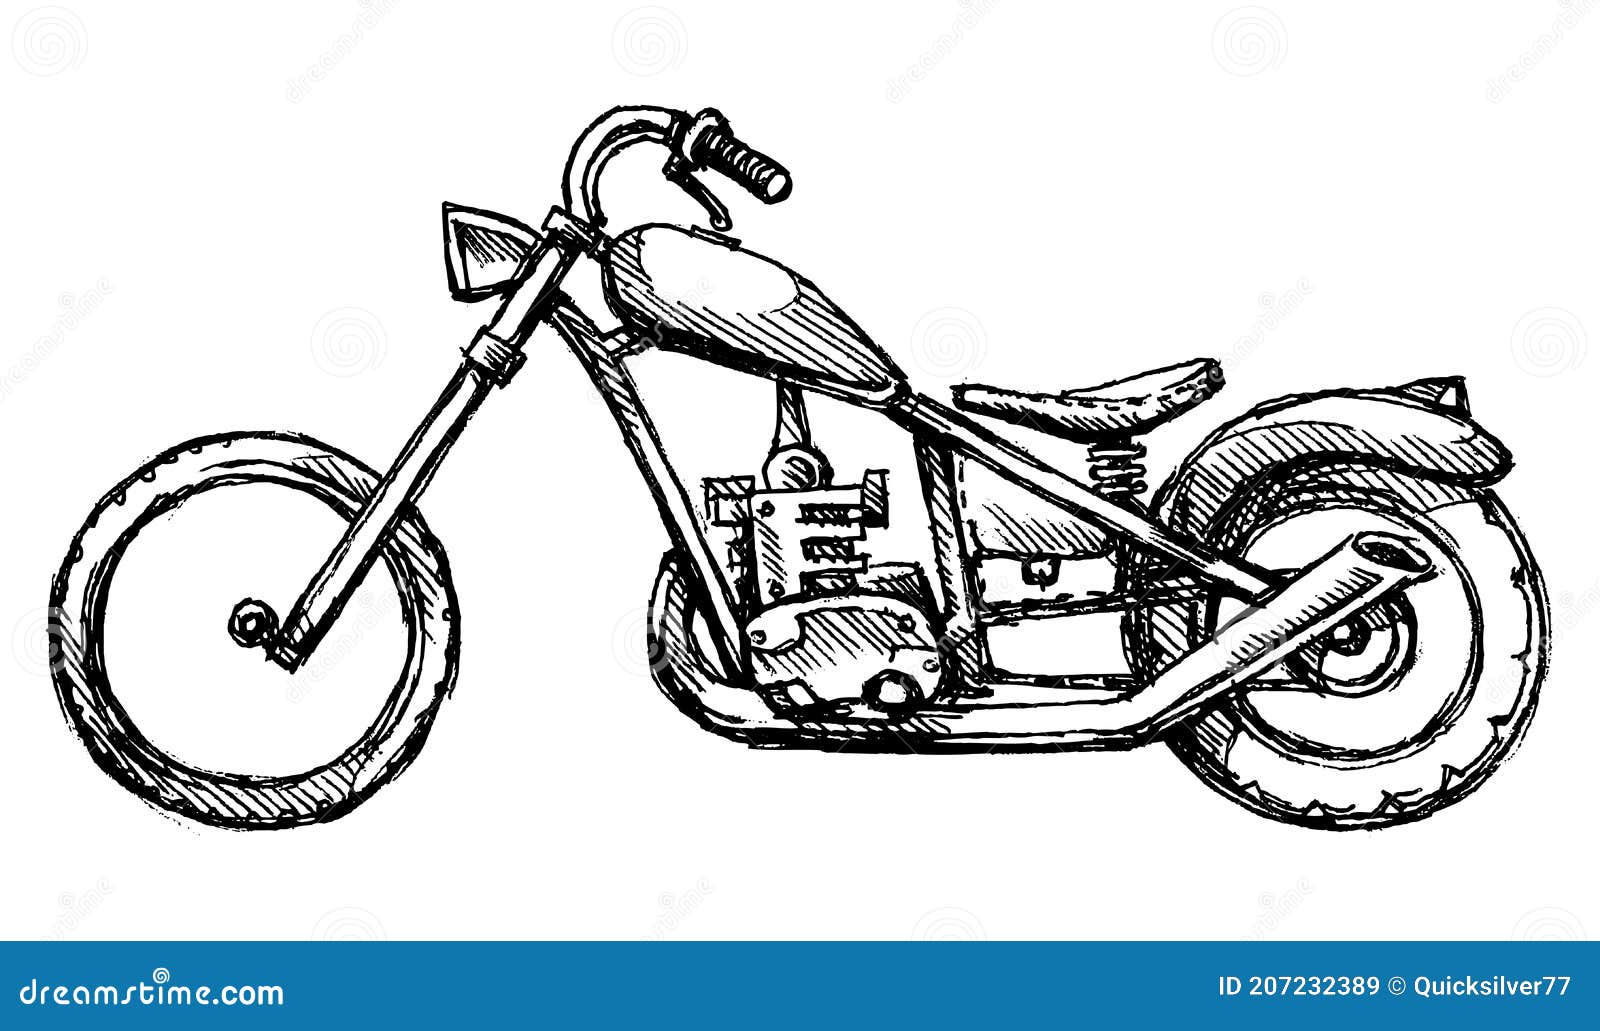 Bike Sketch Artwork Buy HighQuality Posters and Framed Posters Online   All in One Place  PosterGully